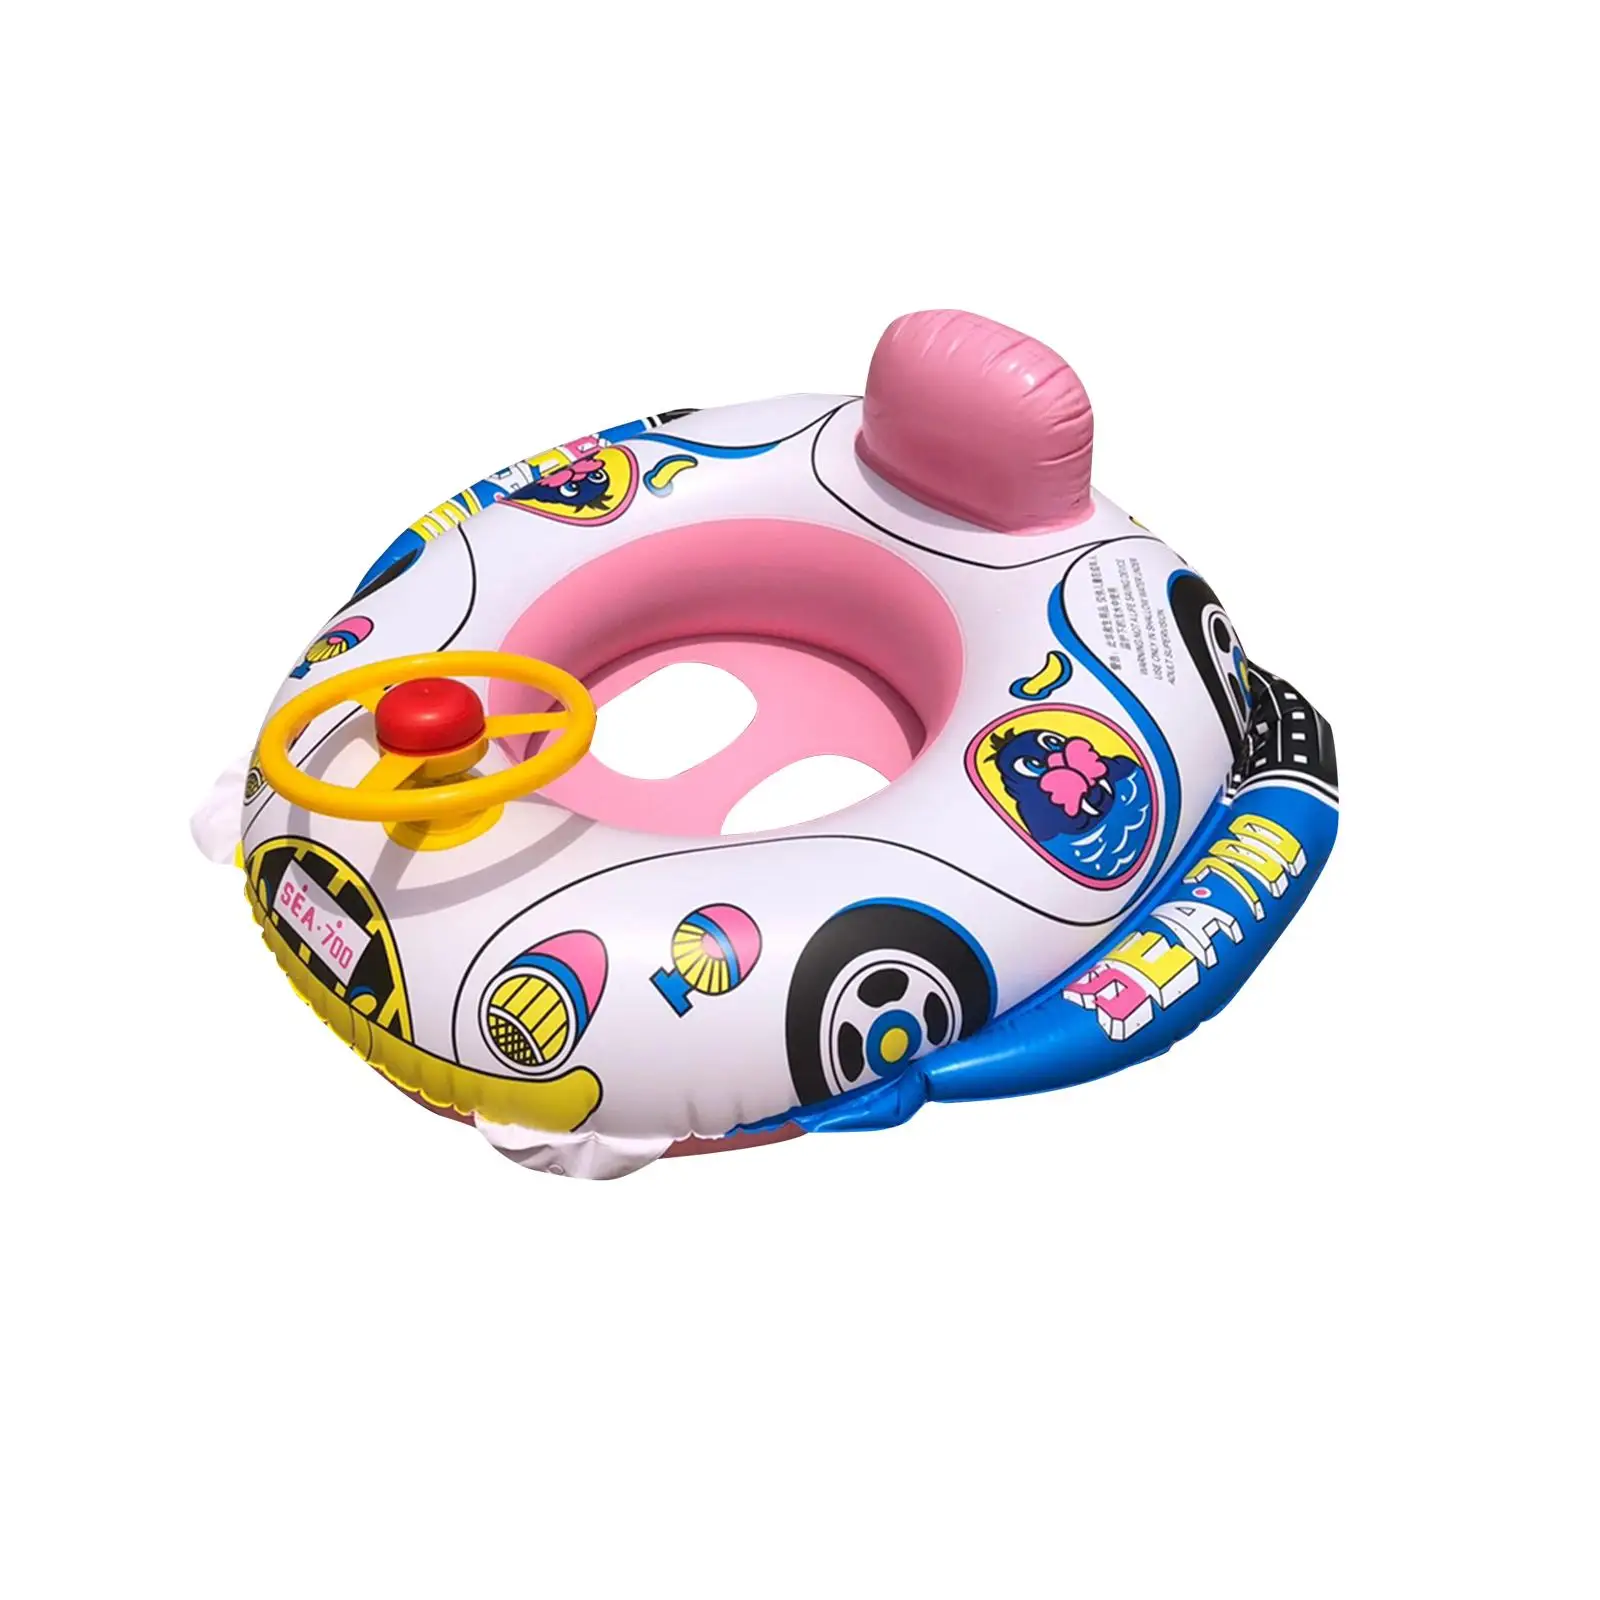 

Baby Swimming Rings Water with Steering Wheel Lake Boats Holidays Child Beach Kids Inflatable Pool Floats Seat Summer Swim Float